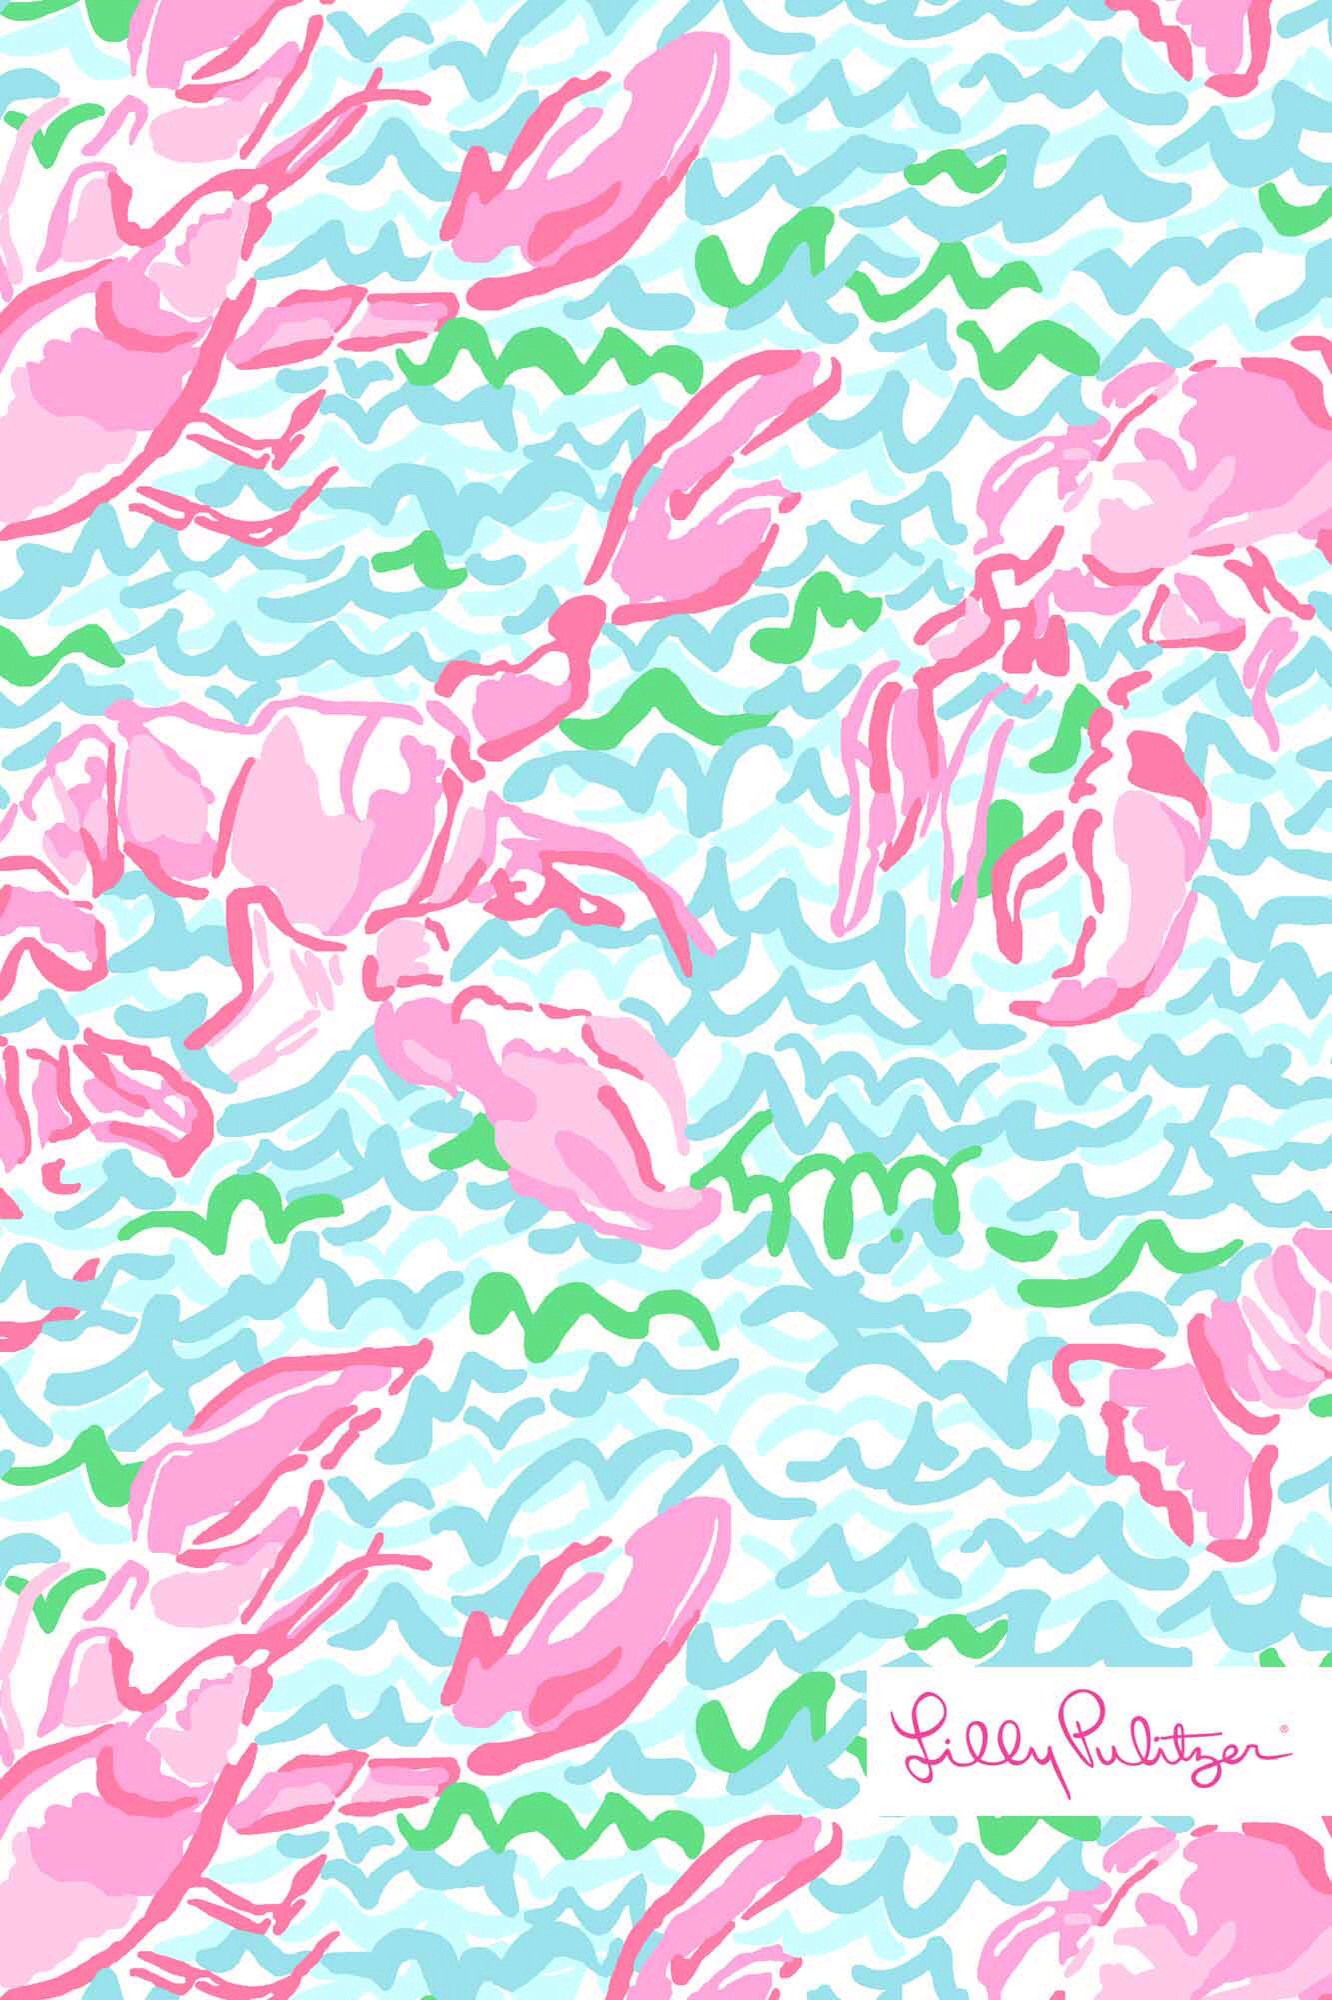 Lilly pulitzer iphone wallpaper and wallpapers on pinterest